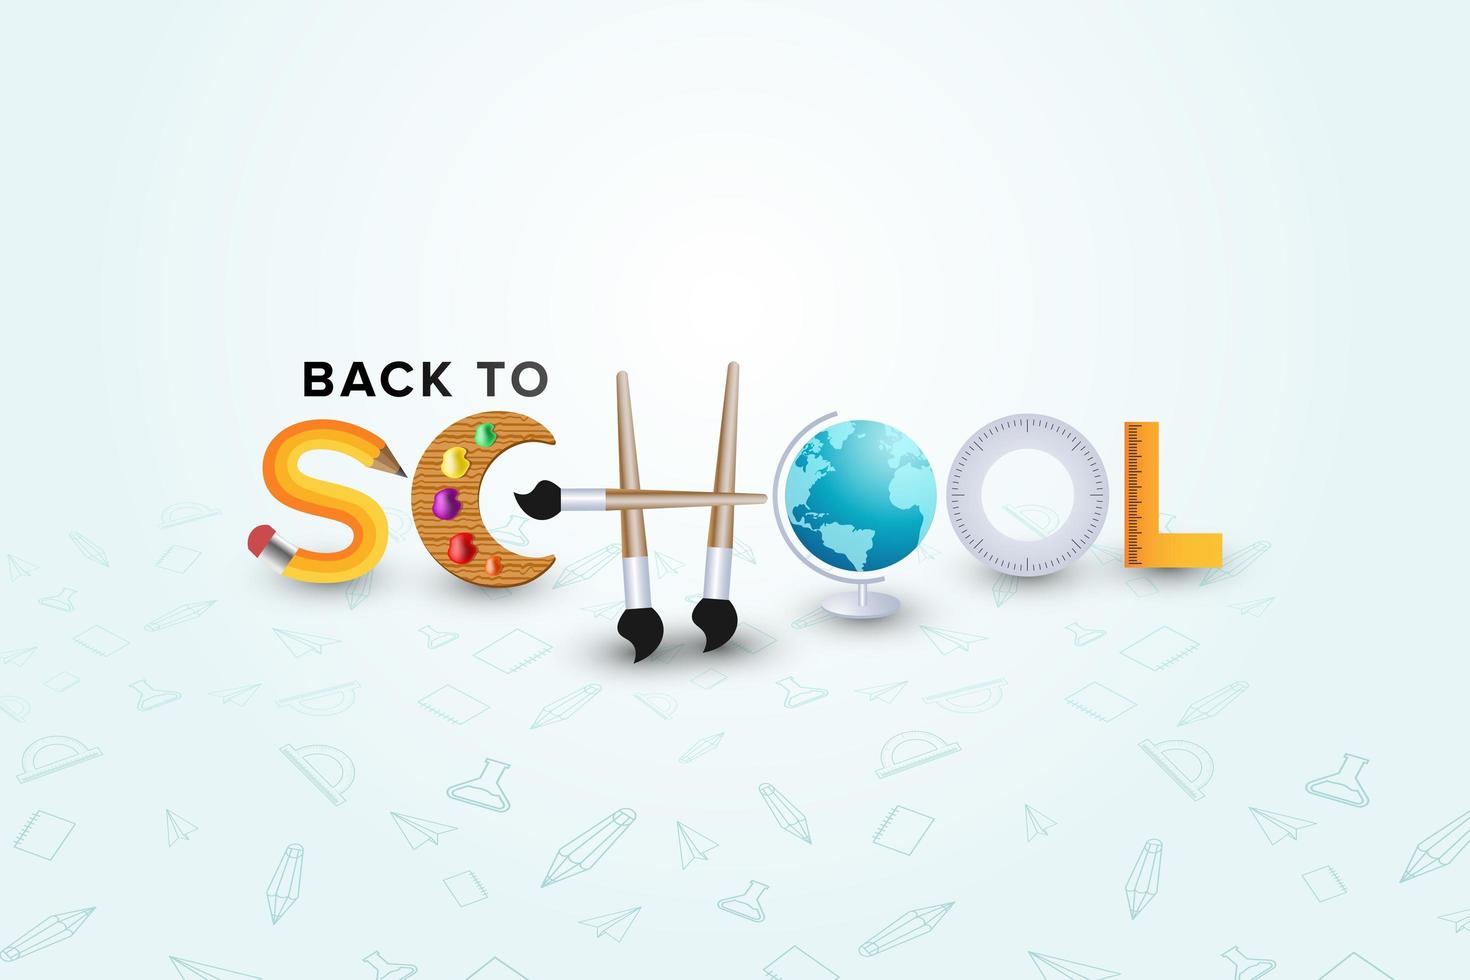 Back to School Elements Poster  vector